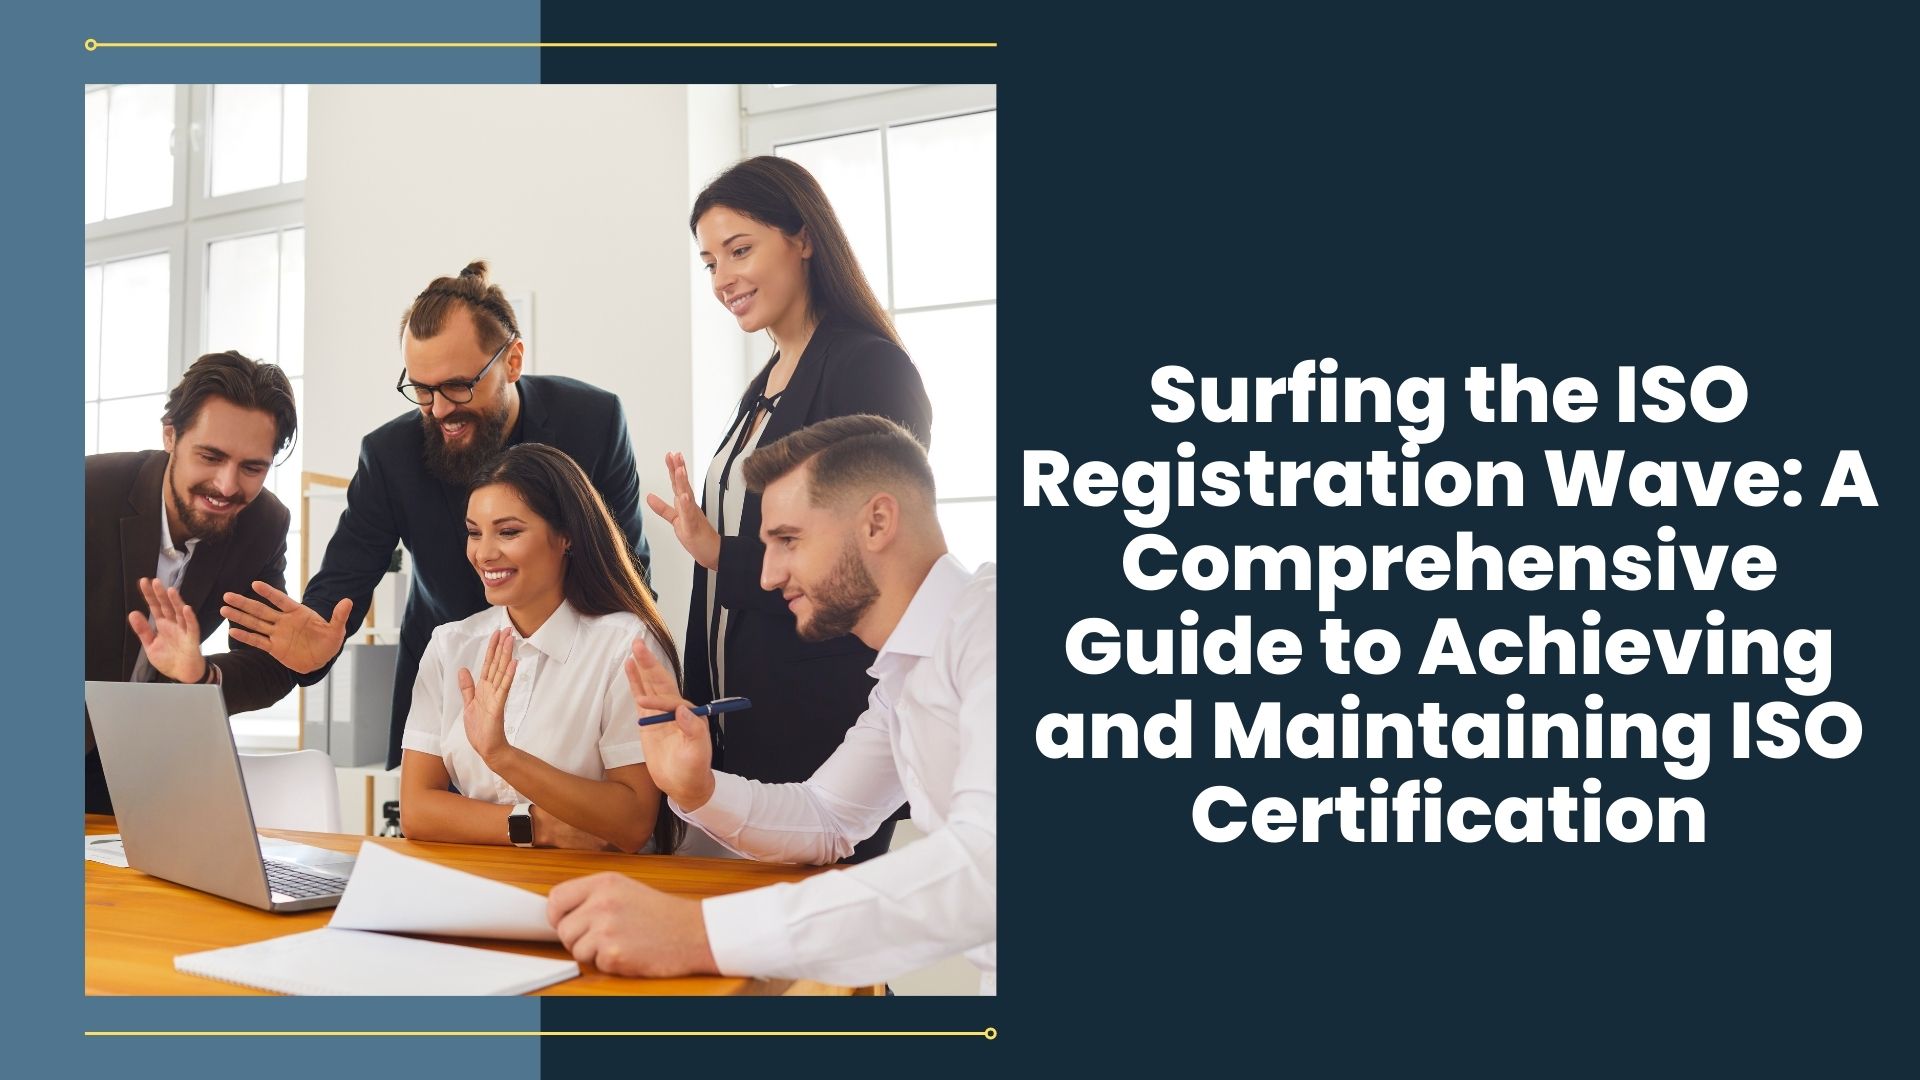 Surfing the ISO Registration Wave: A Comprehensive Guide to Achieving and Maintaining ISO Certification